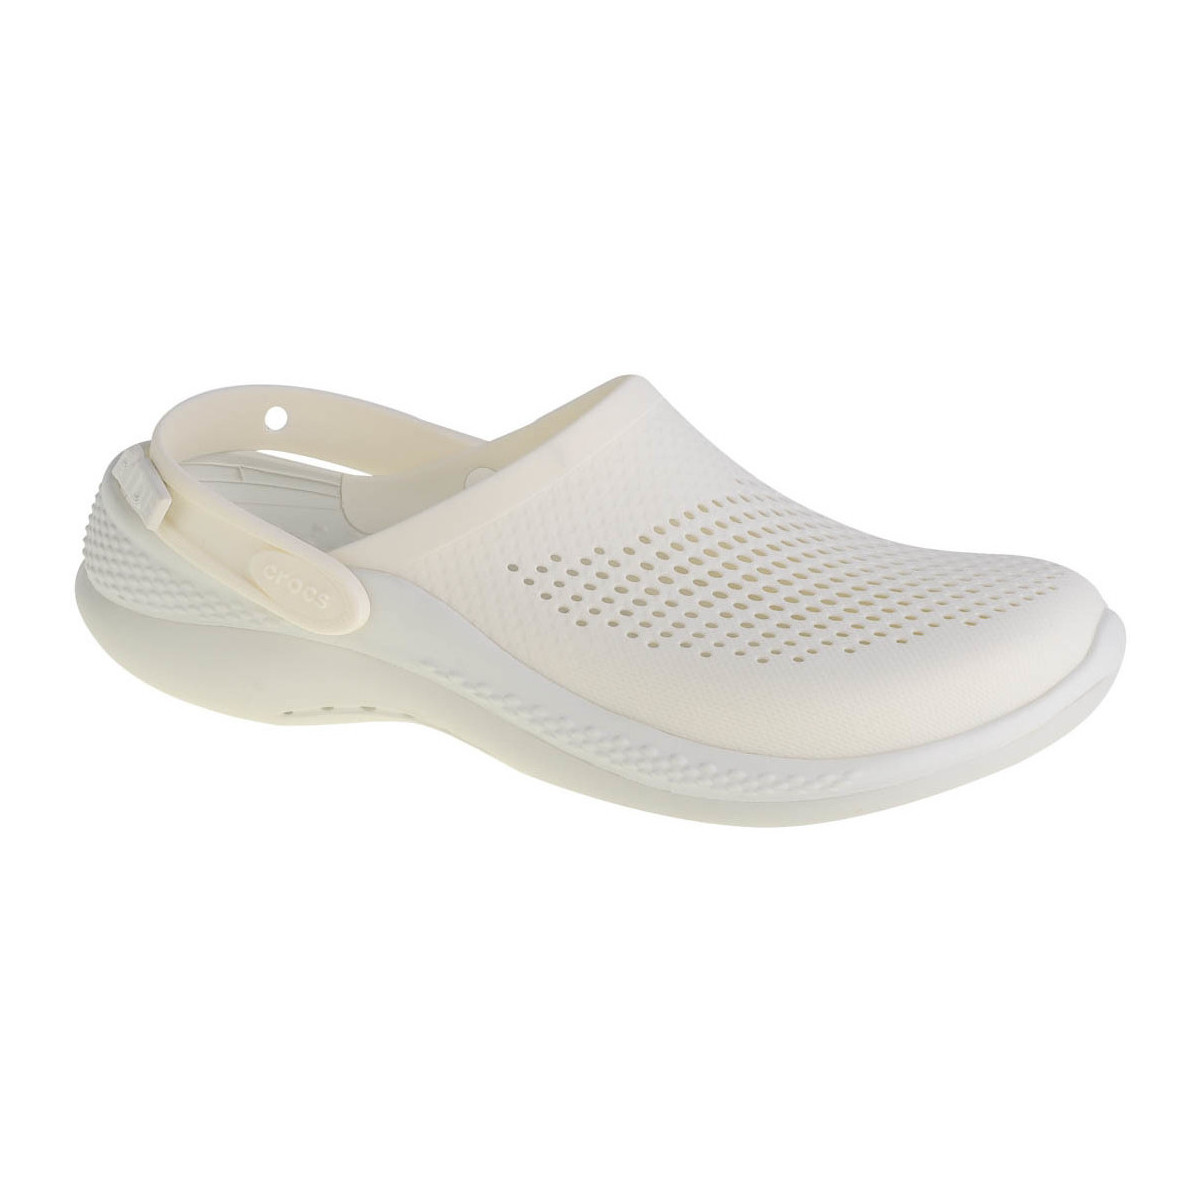 Chaussures Homme Chaussons Crocs Literide 360 Clog Blanc